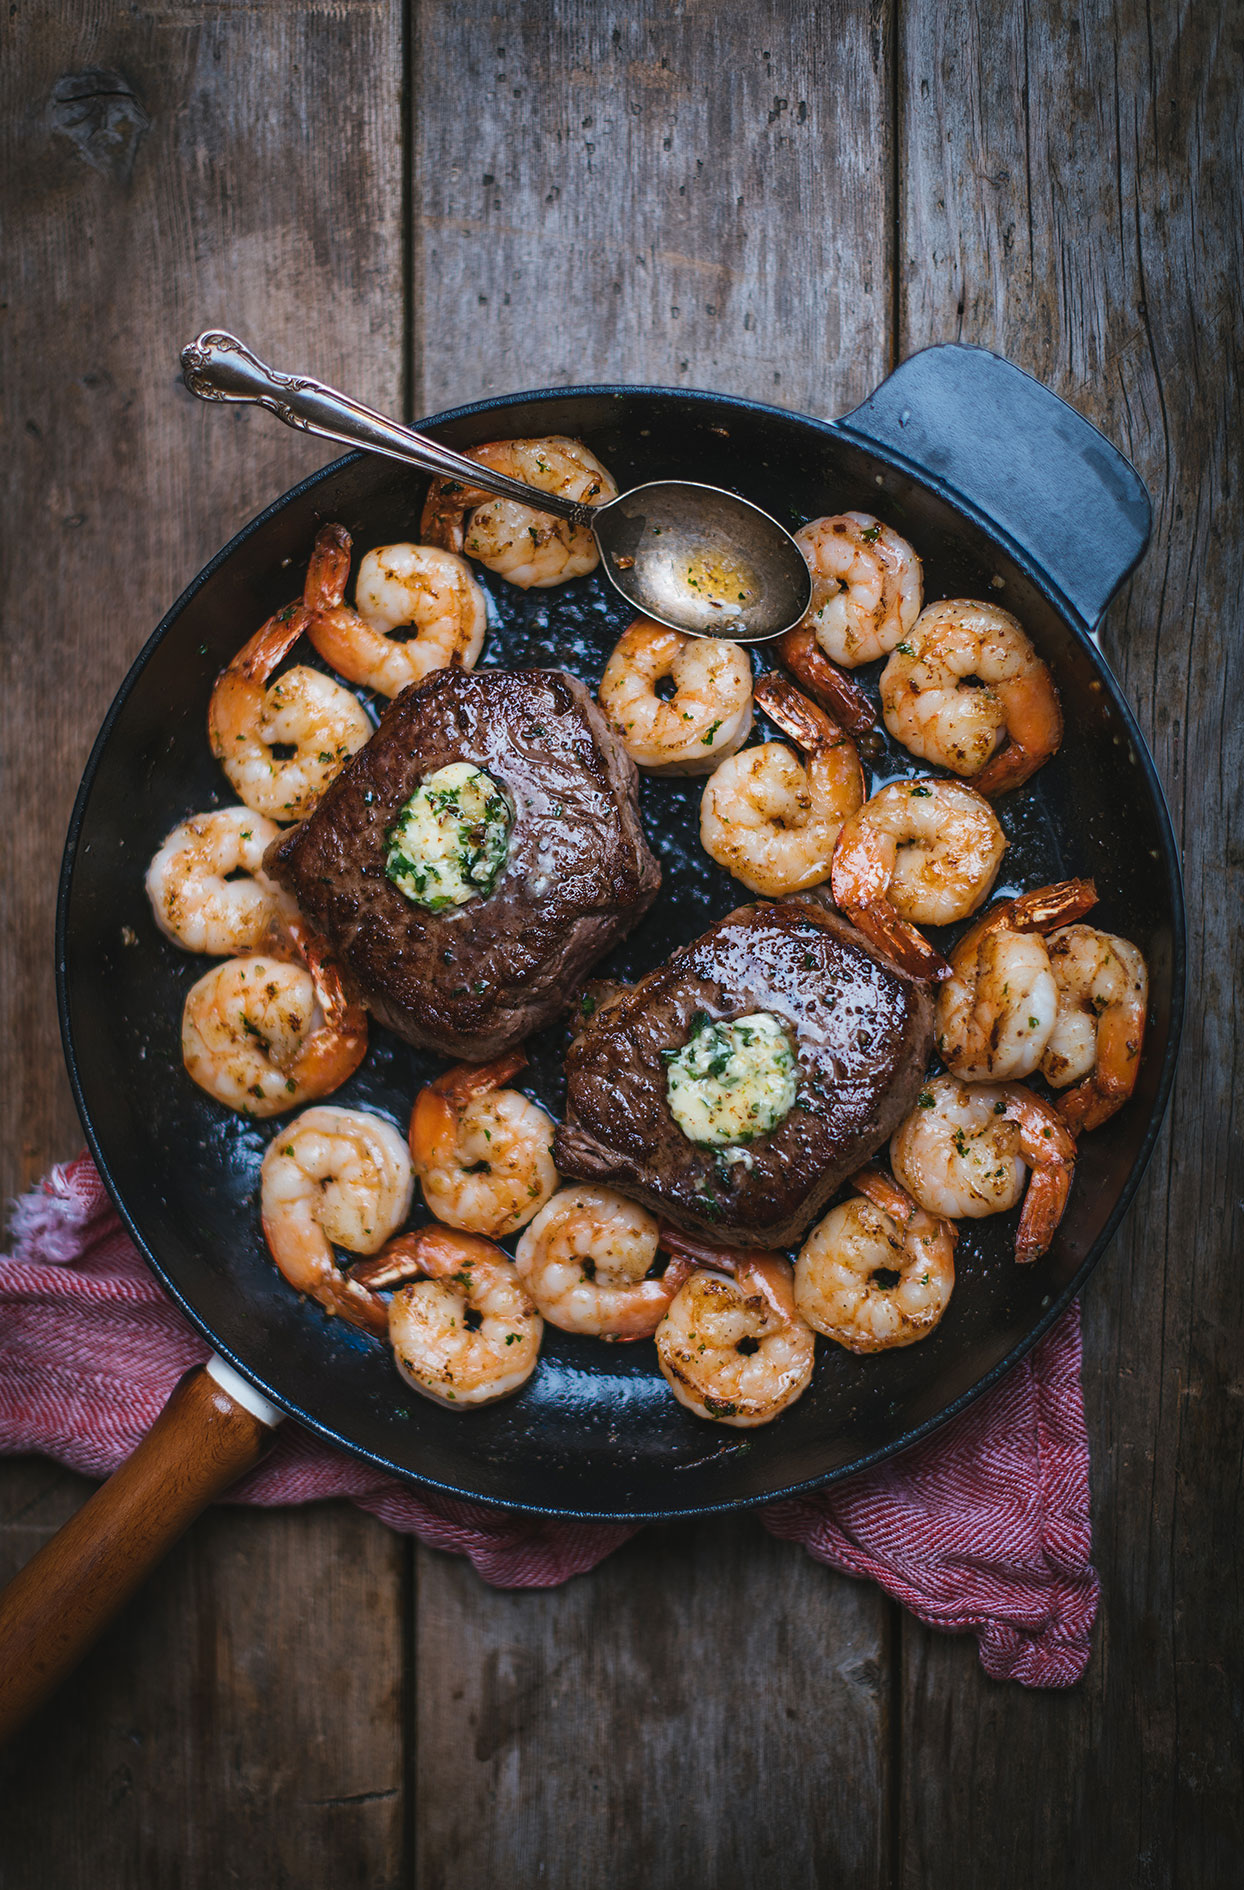 Manhattan striploin steak with shrimps and garlic butter (surf and turf)